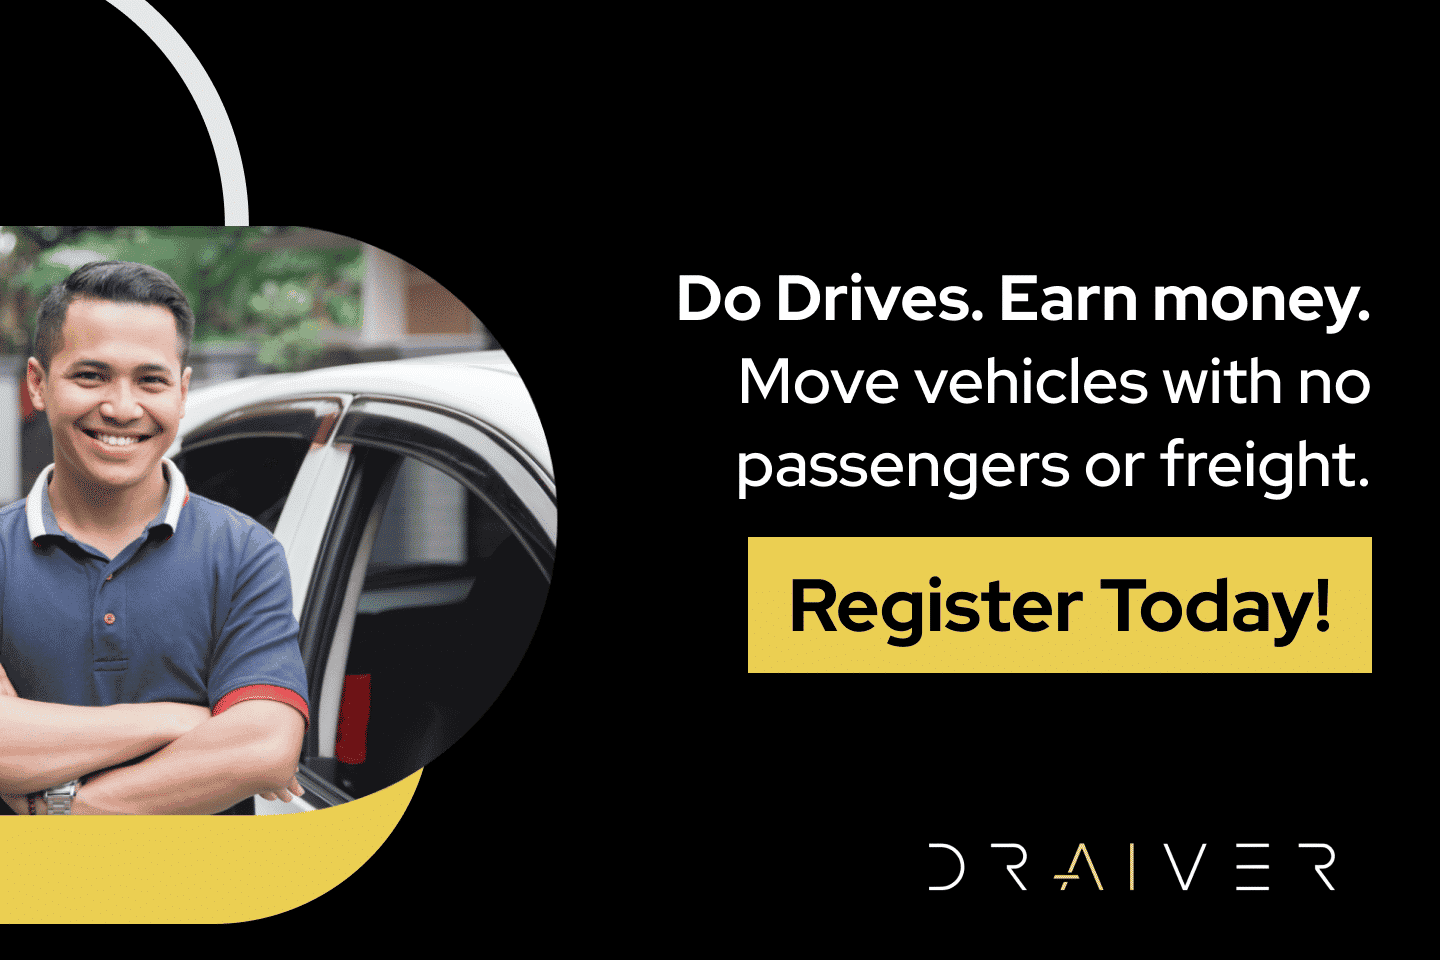 Do Drive and Earn Money